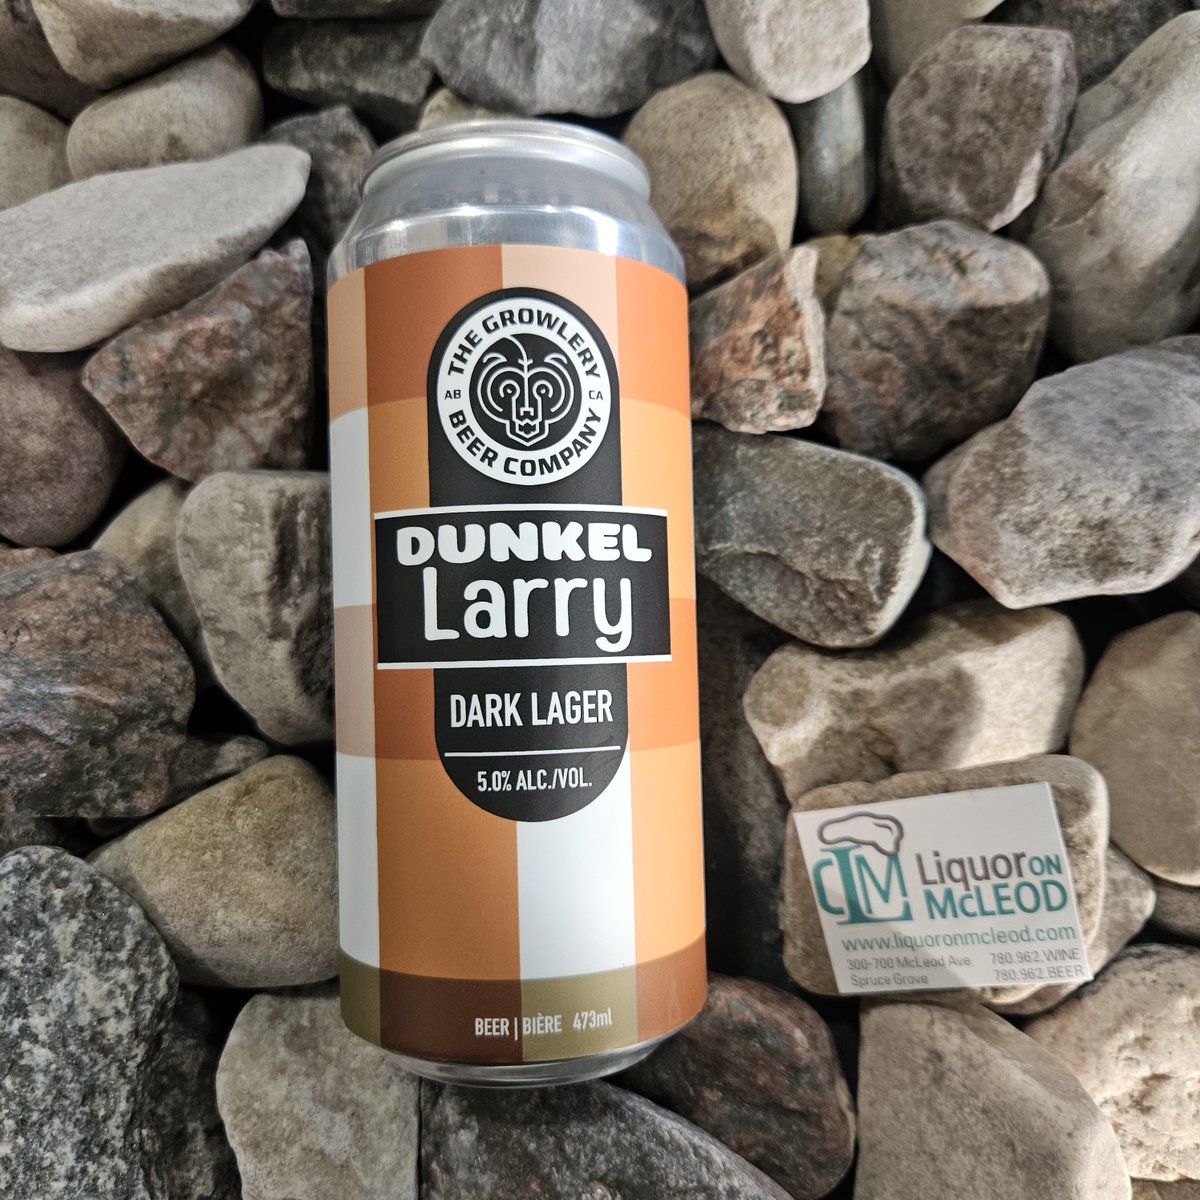 Dunkel Larry from @growlerybeer is a classic German-style Dunkel. Its rich mahogany hue and toasty, caramel, and chocolate notes offer a warm, malt-forward experience. #thegrowlery #yegbeer #sprucegrove #liquoronmcleod #stonyplain